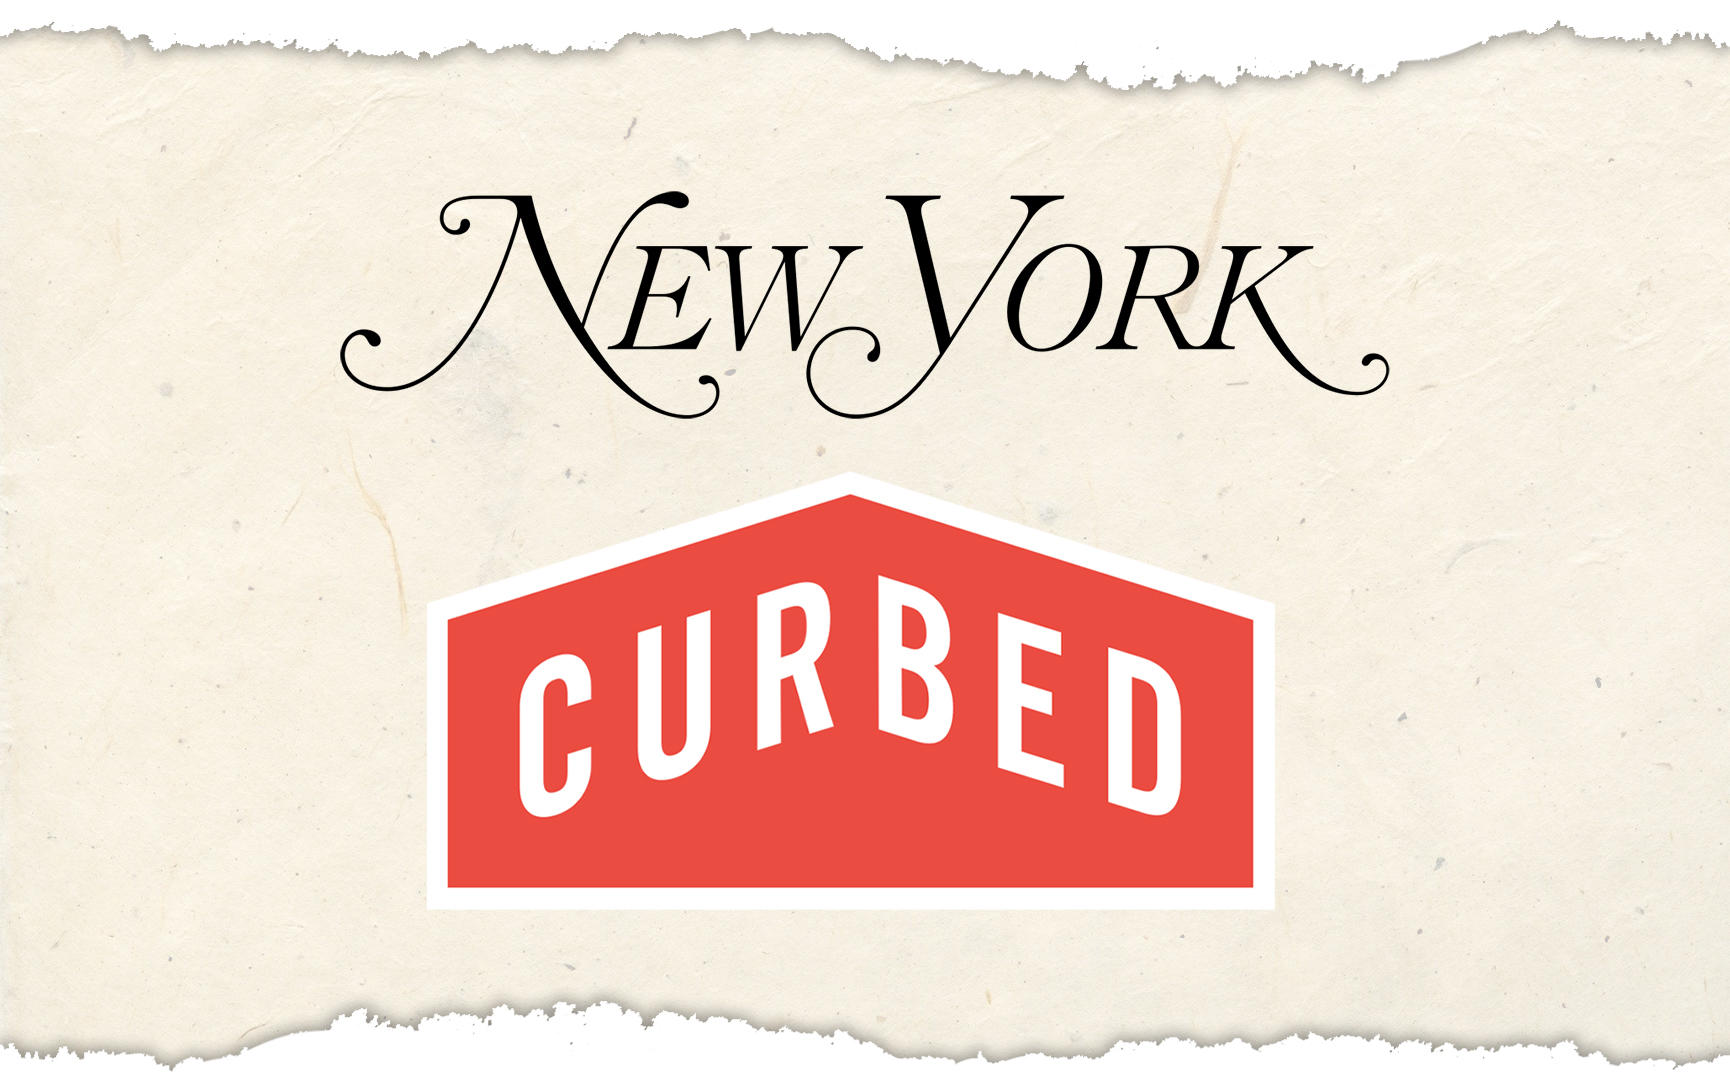 Shortly after announcing furloughs and pay cuts, Vox Media has folded Curbed into NYMag, which it bought in September